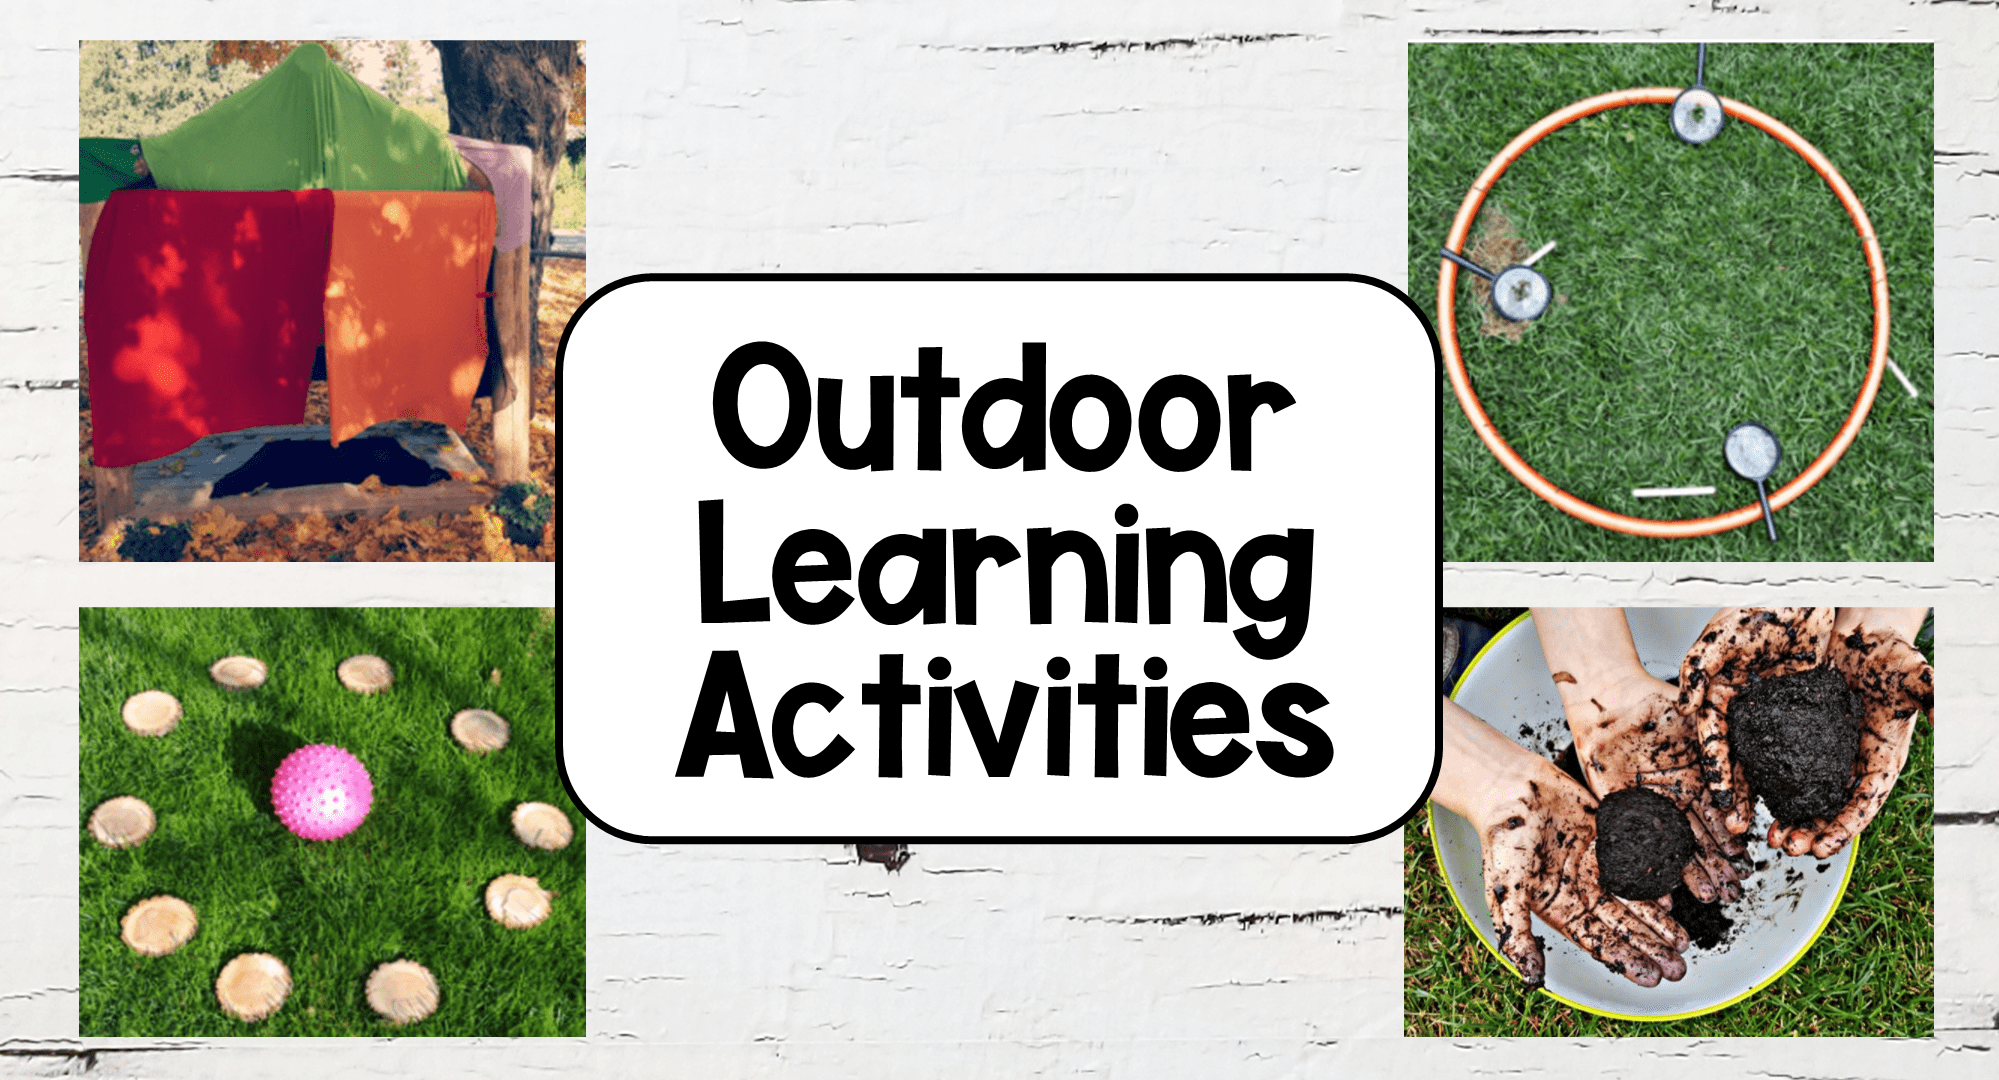 63 Outdoor Learning Activities Kids will Love - Hands-On Teaching Ideas